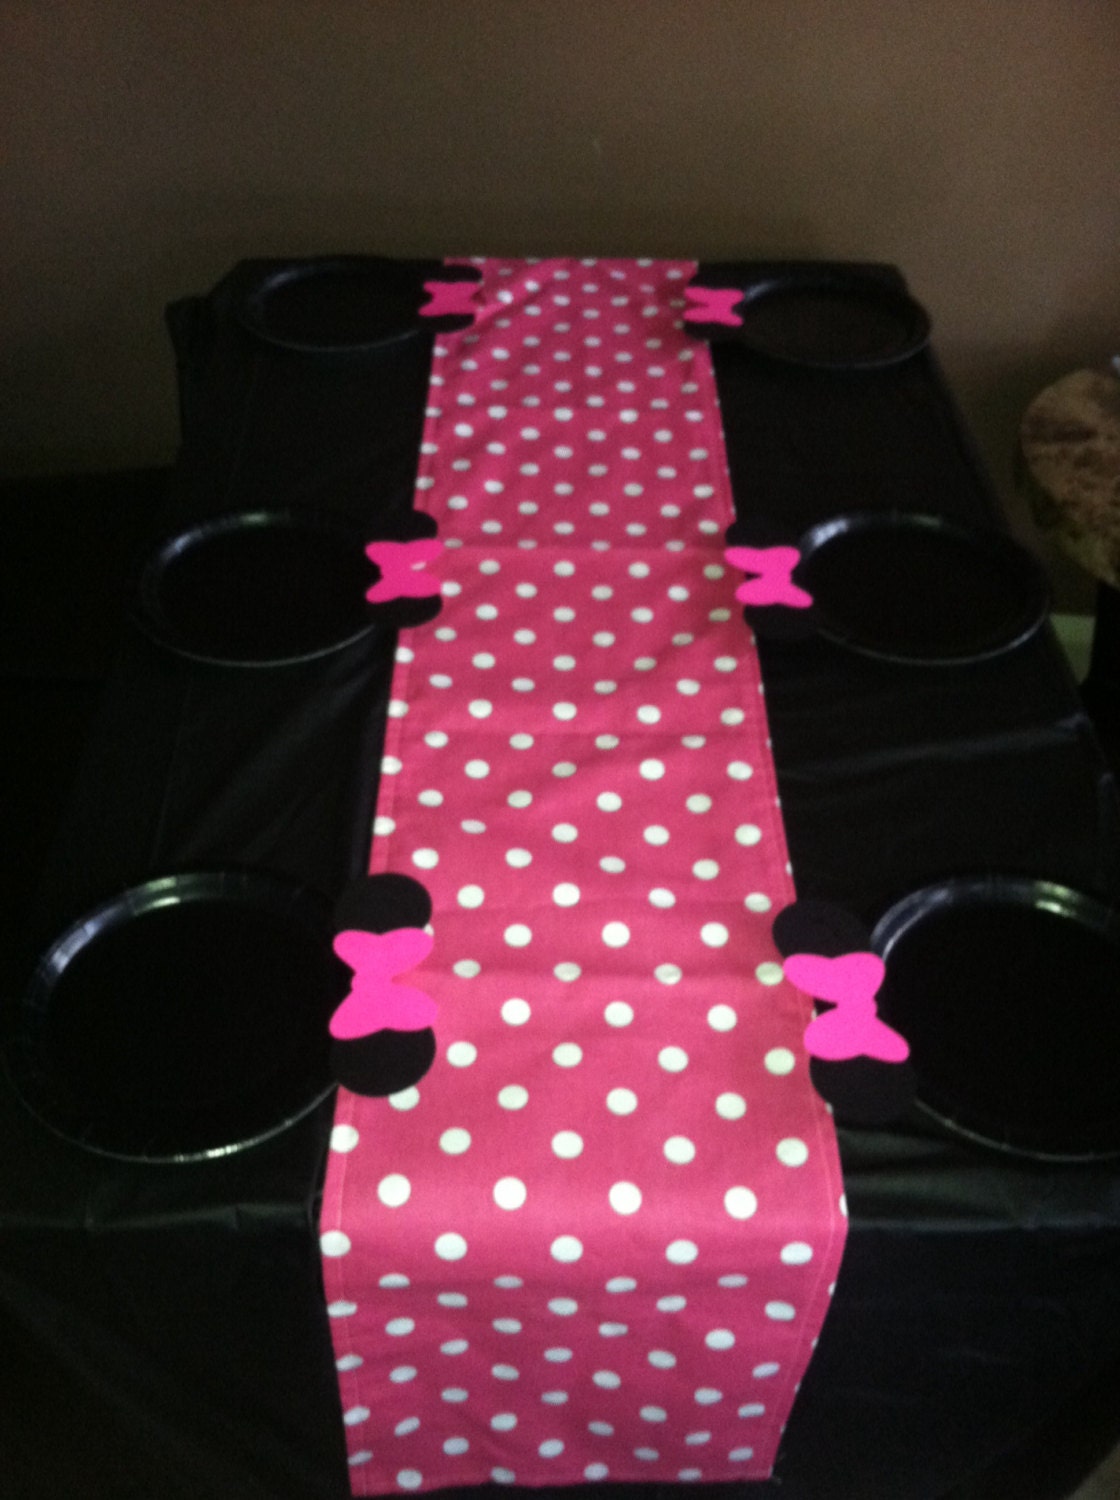 Hot pink polka dot table runnerMINNI MOUSE by EllaBellaFabric